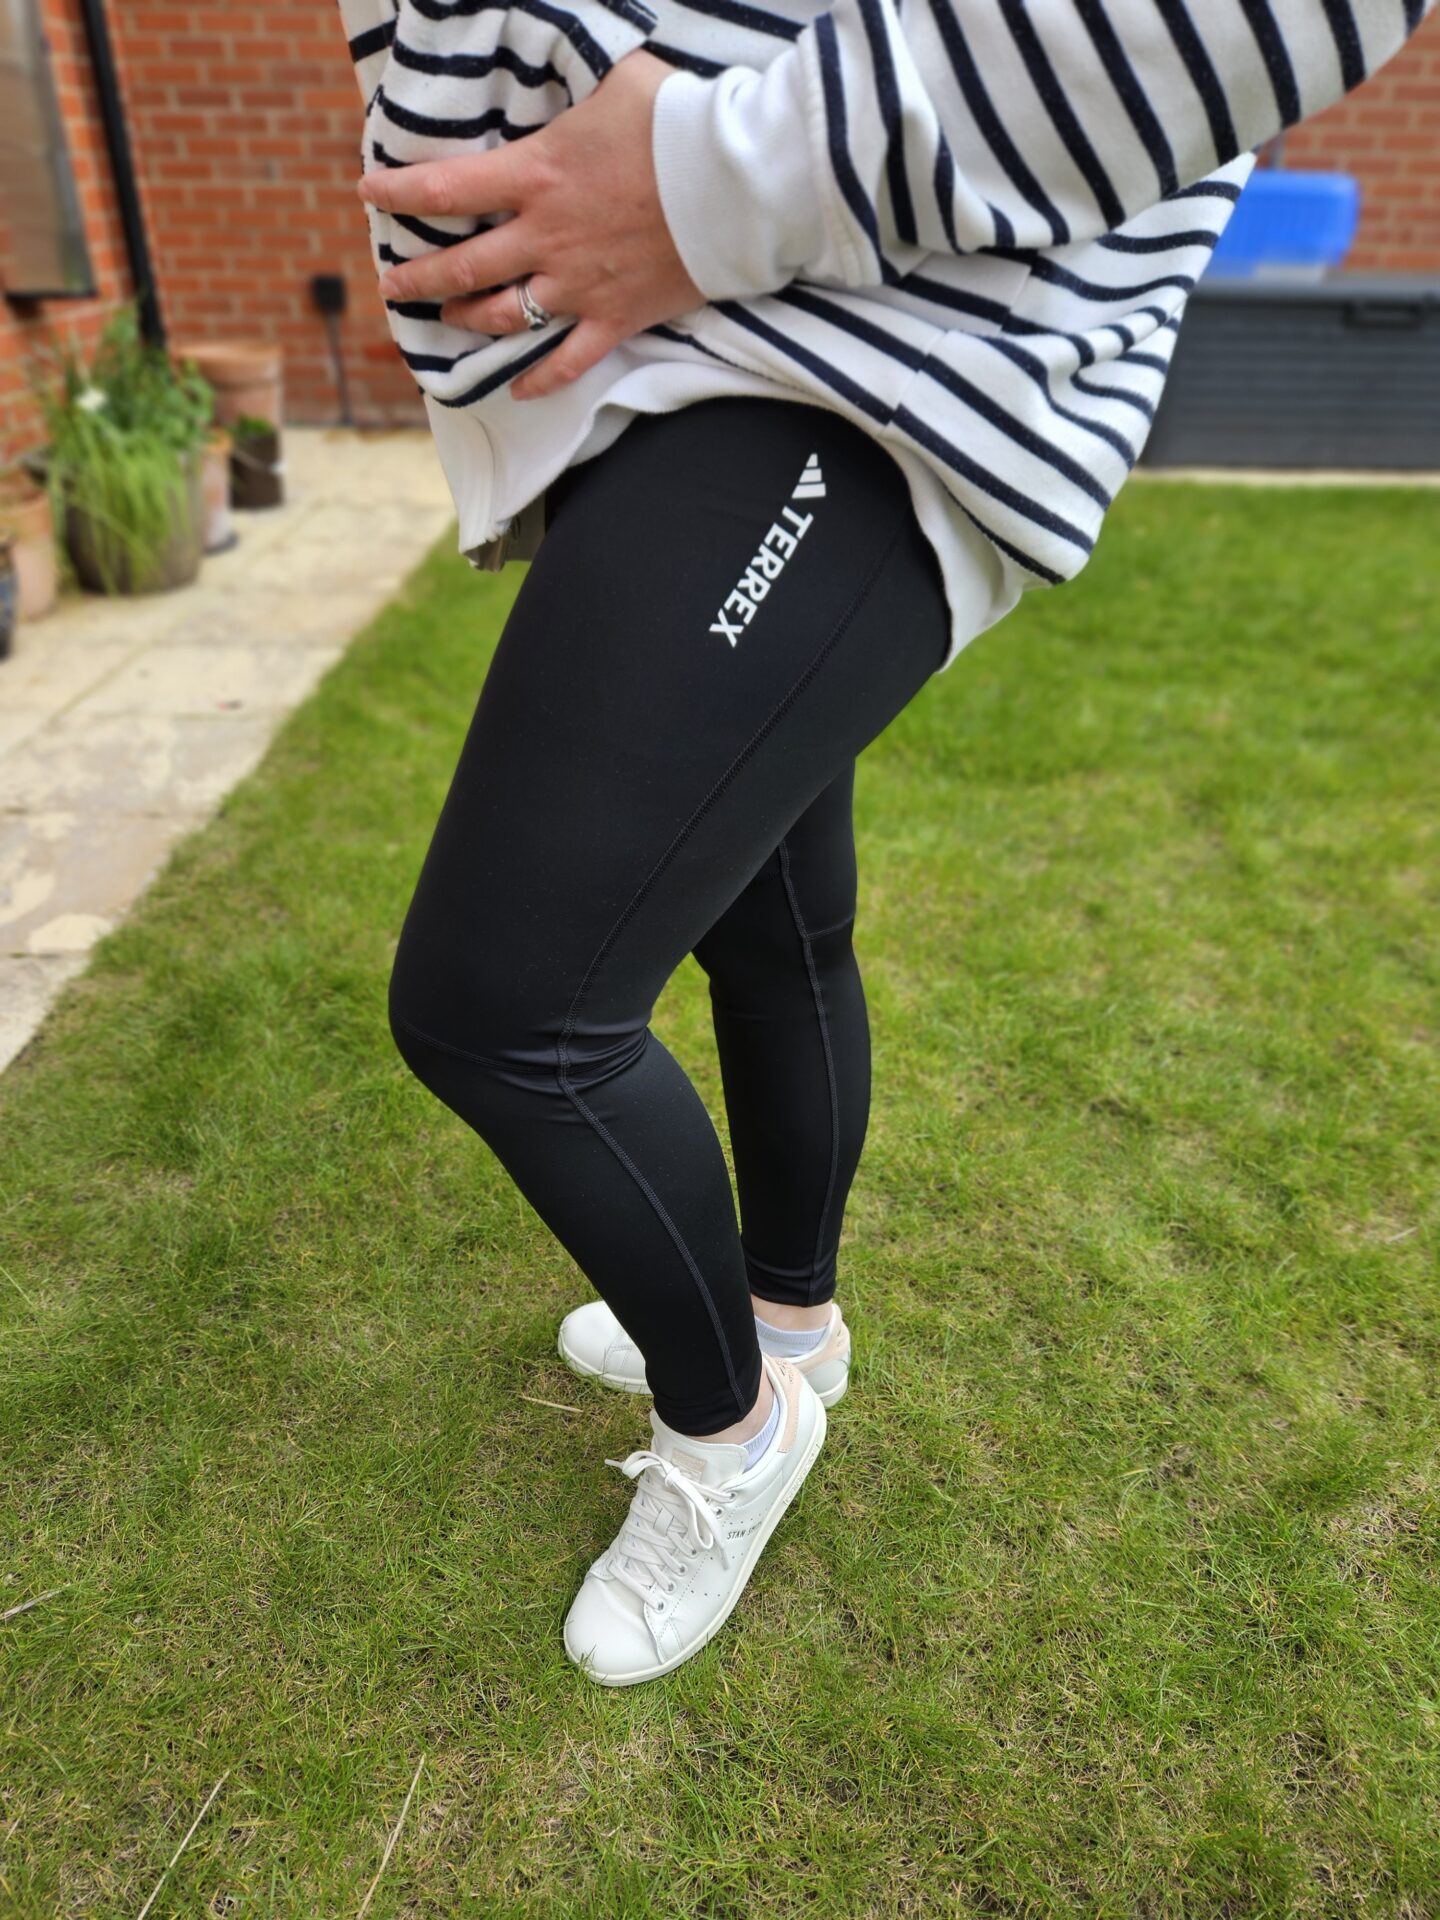 Woman's legs wearing black leggings, white trainers and a blue and white striped hoody. She is standing on green grass. 